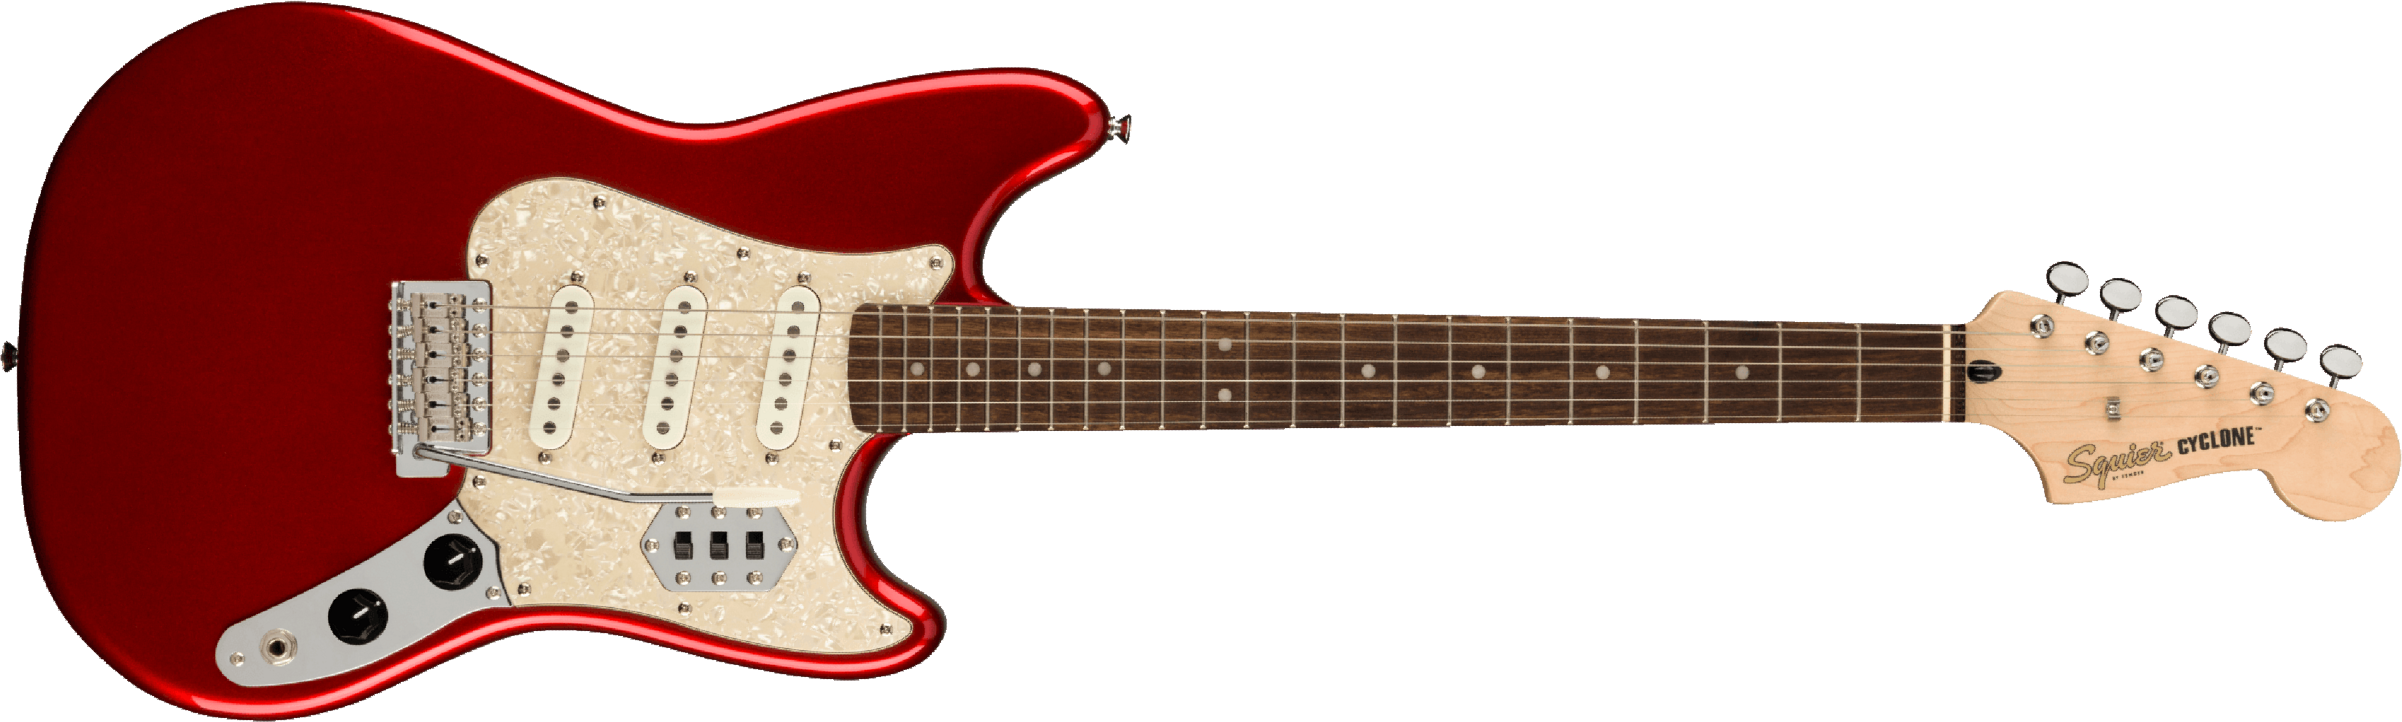 Squier Cyclone Paranormal 3s Trem Lau - Candy Apple Red - Retro-Rock-E-Gitarre - Main picture